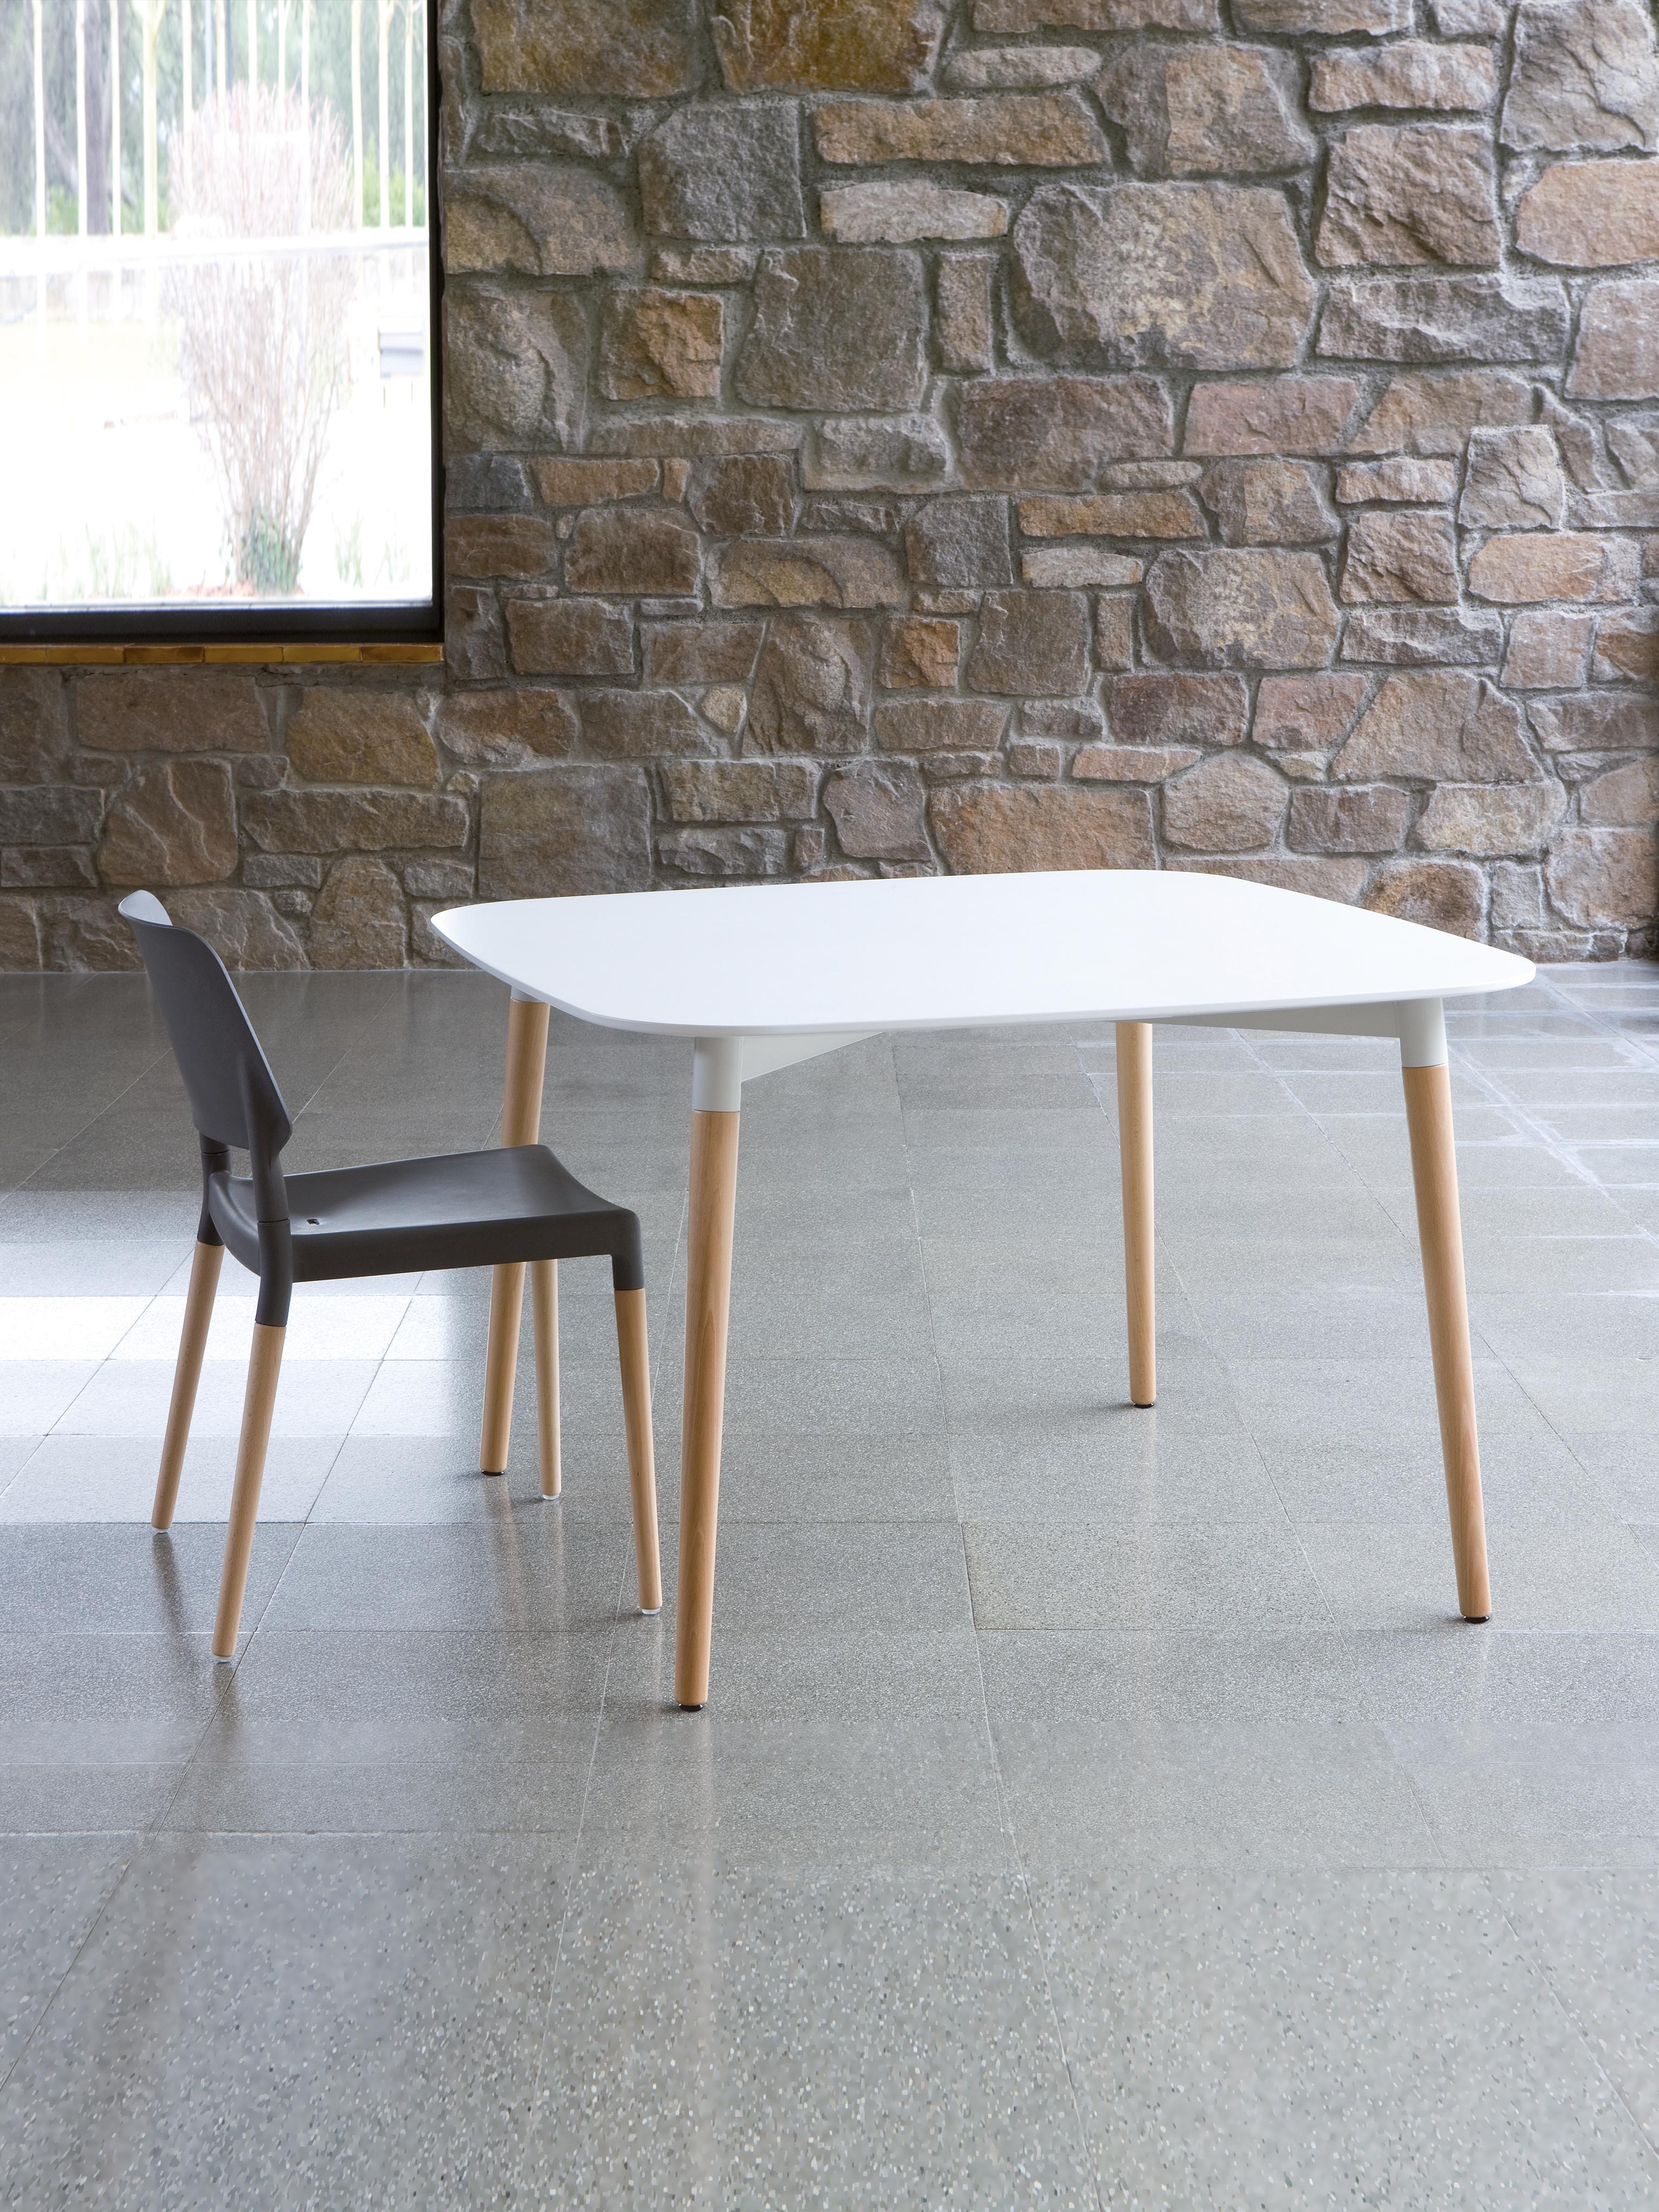 Belloch Cuadrada table by Lagranja Design
Dimensions: D 110 x W 110 x H 73 cm
Materials: Metal, beech wood.
Available in 2 sizes: D110 x W 110, D110x W180 cm.

The Belloch is a large, comfortable table whose laminate top features rounded